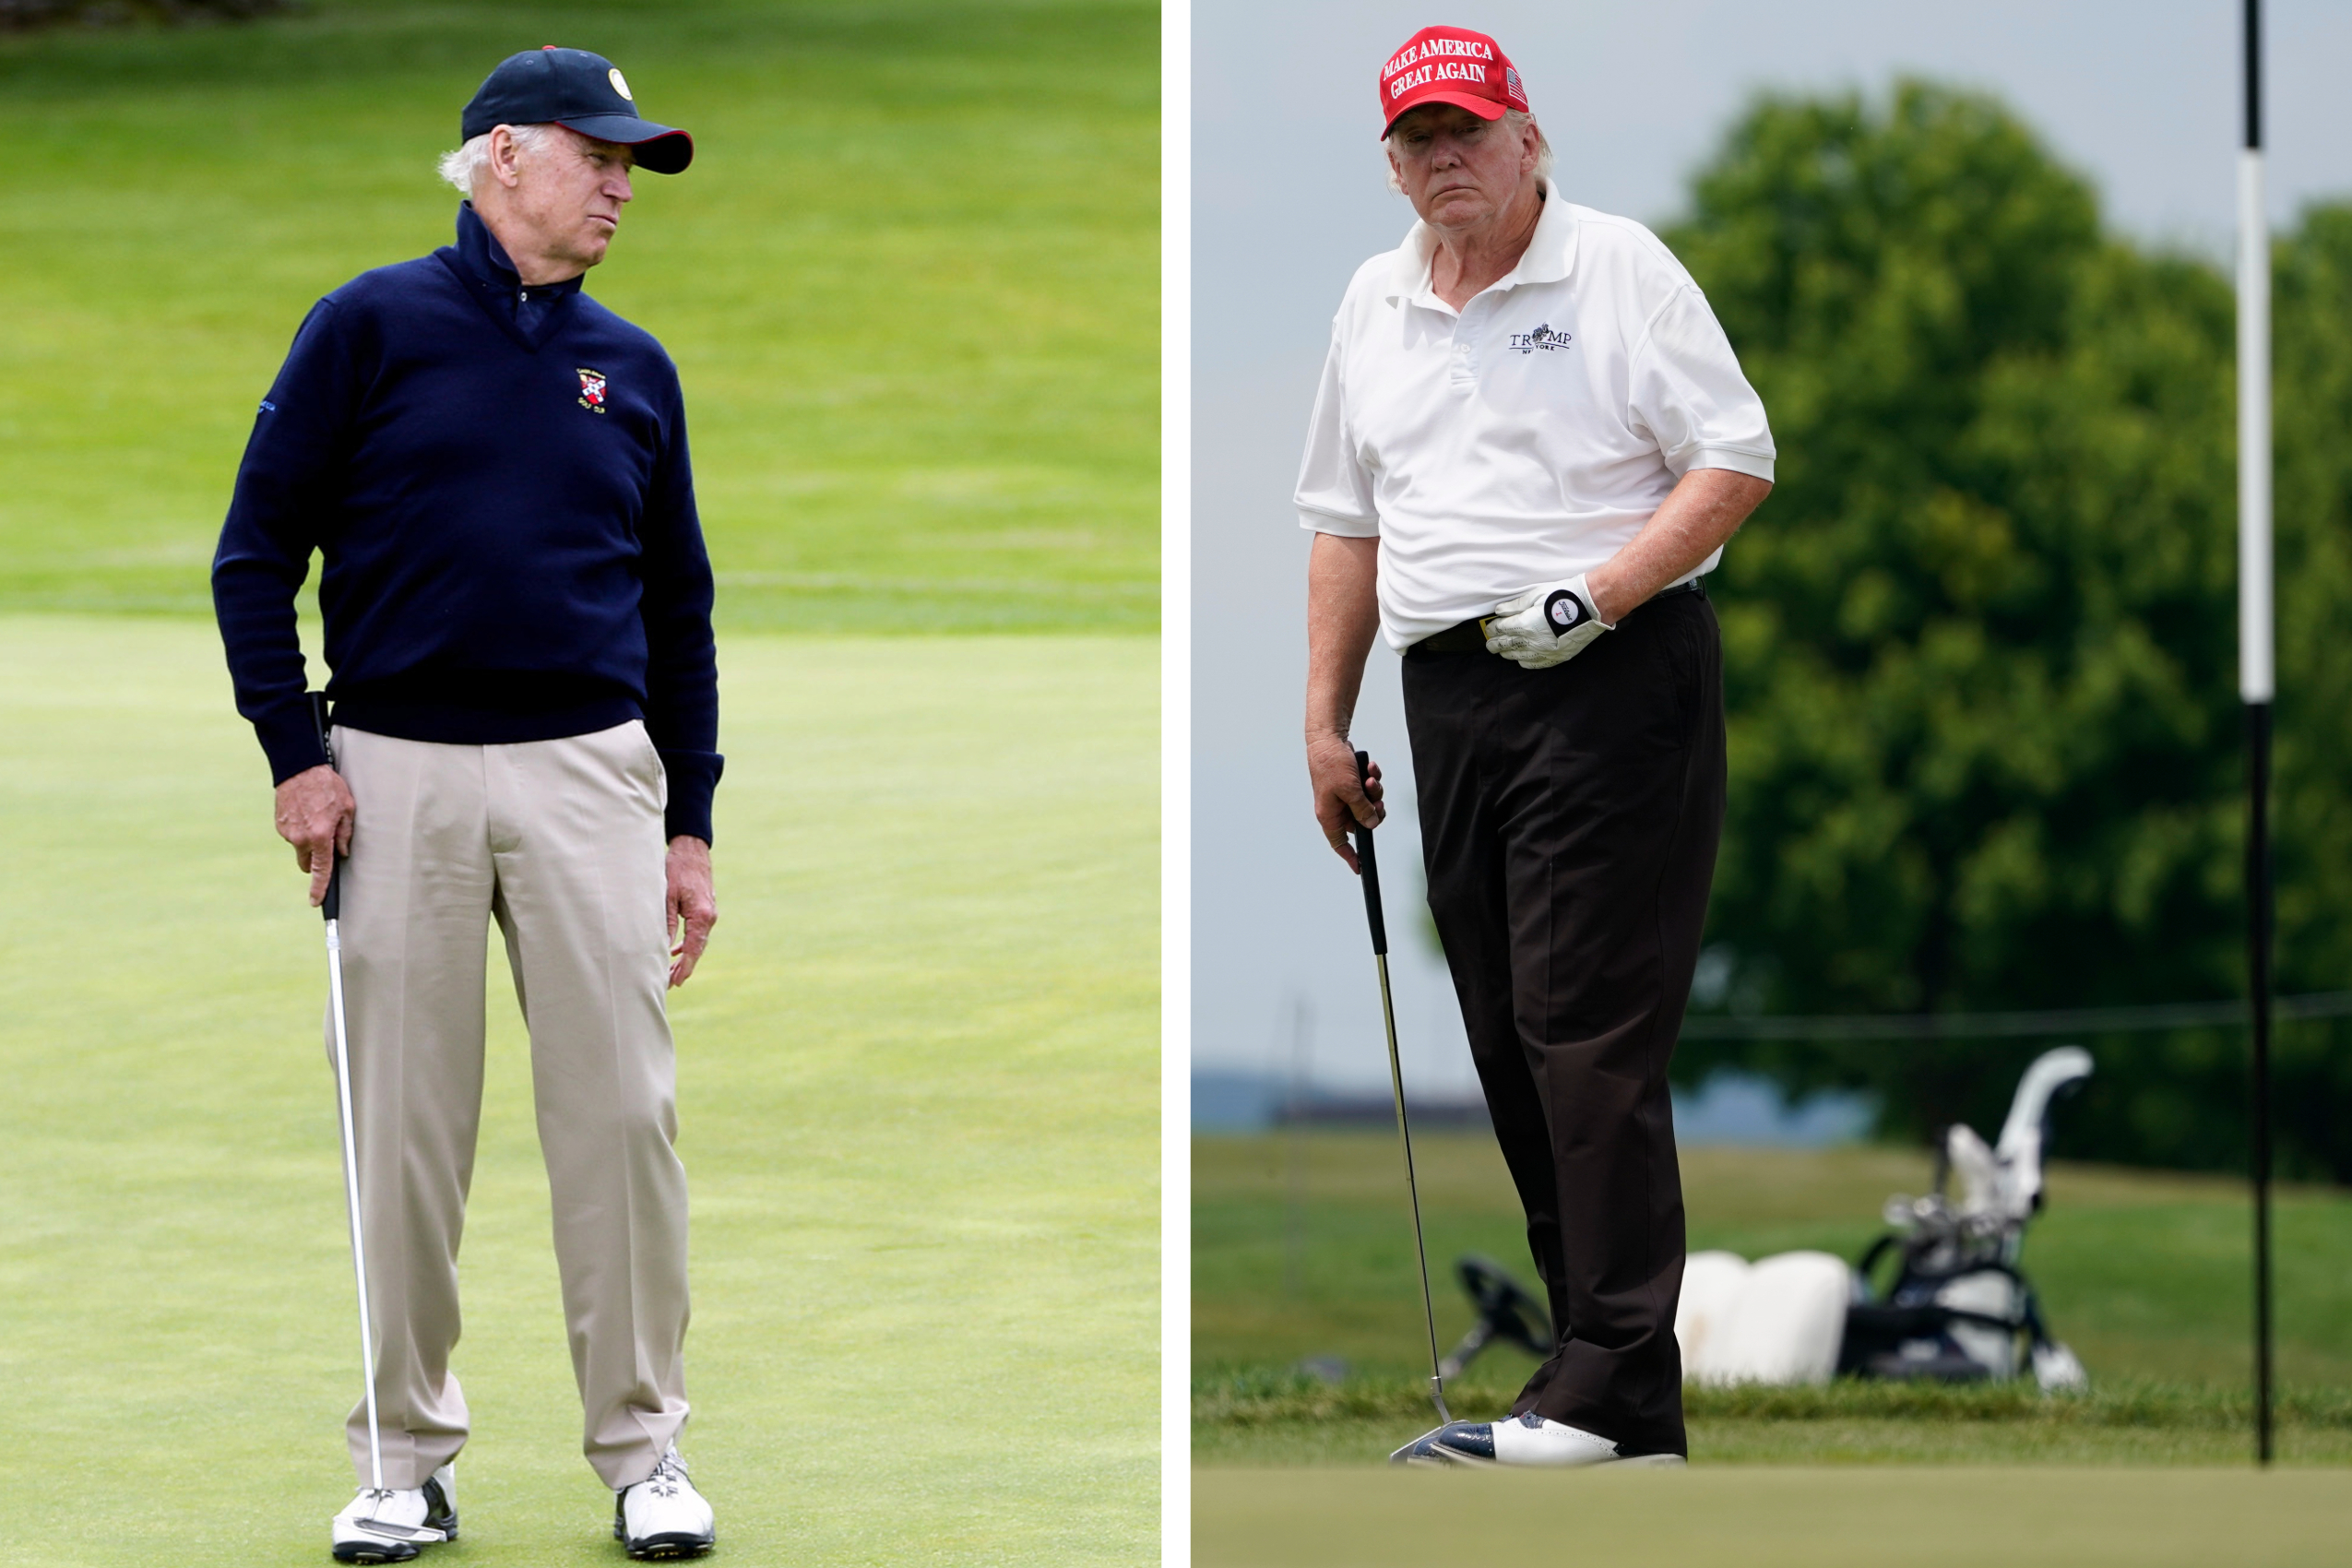 Two men are playing golf on a green course. One wears a navy jacket and beige pants; the other wears a white polo, black pants, and a red cap. Both hold golf clubs.